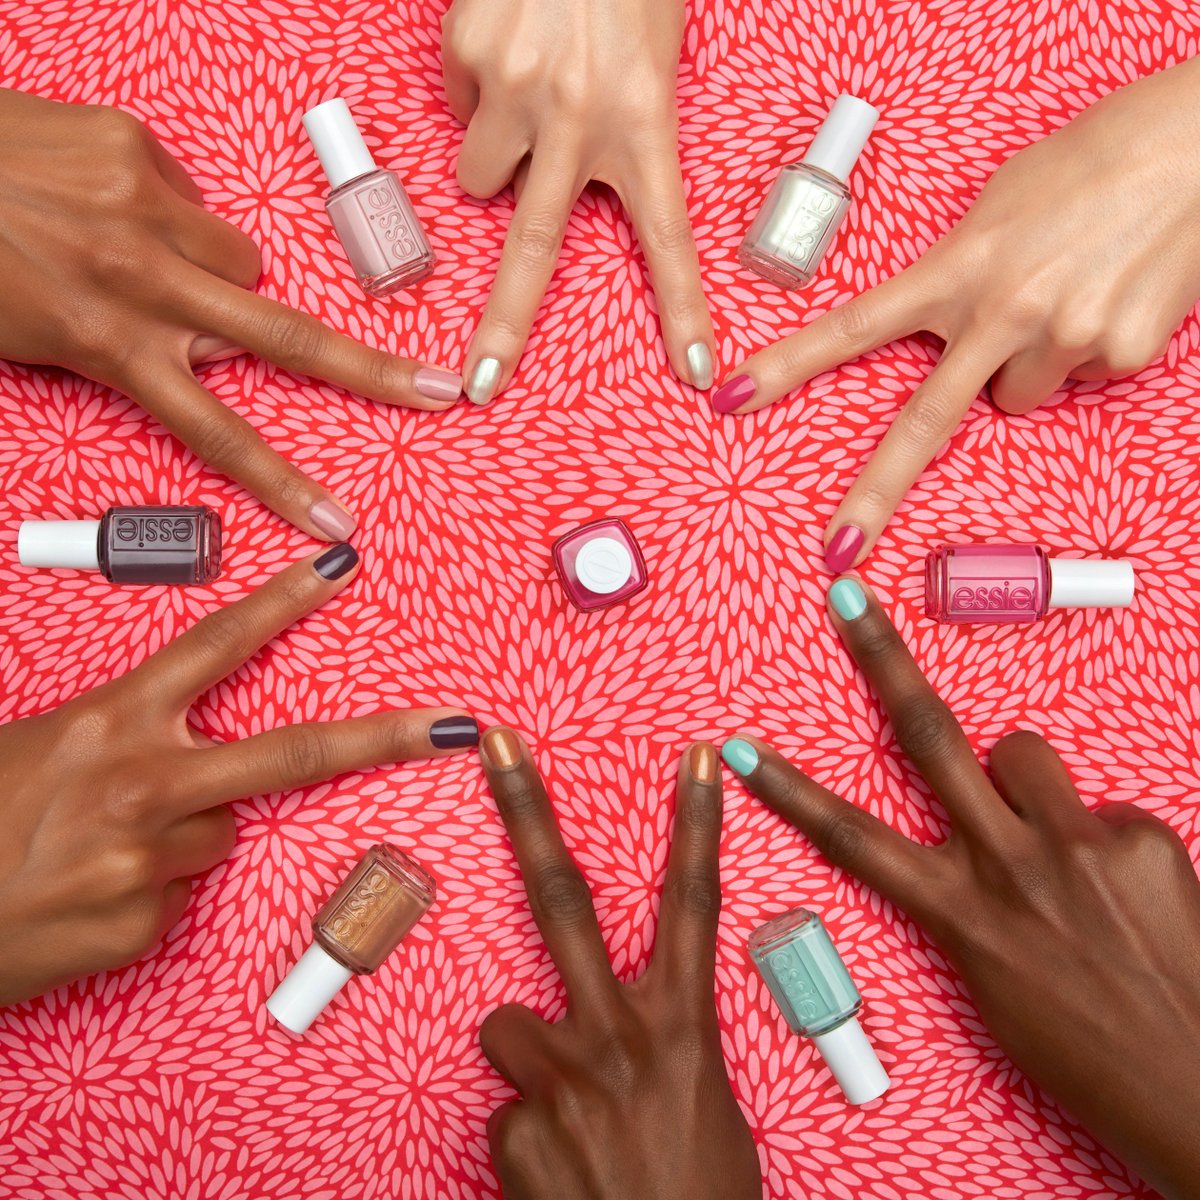 Keep up the summer vibes with new essie shades from Summer 2018 collection🌞💅Which one is your fave? #essiesummer #essielove 💞